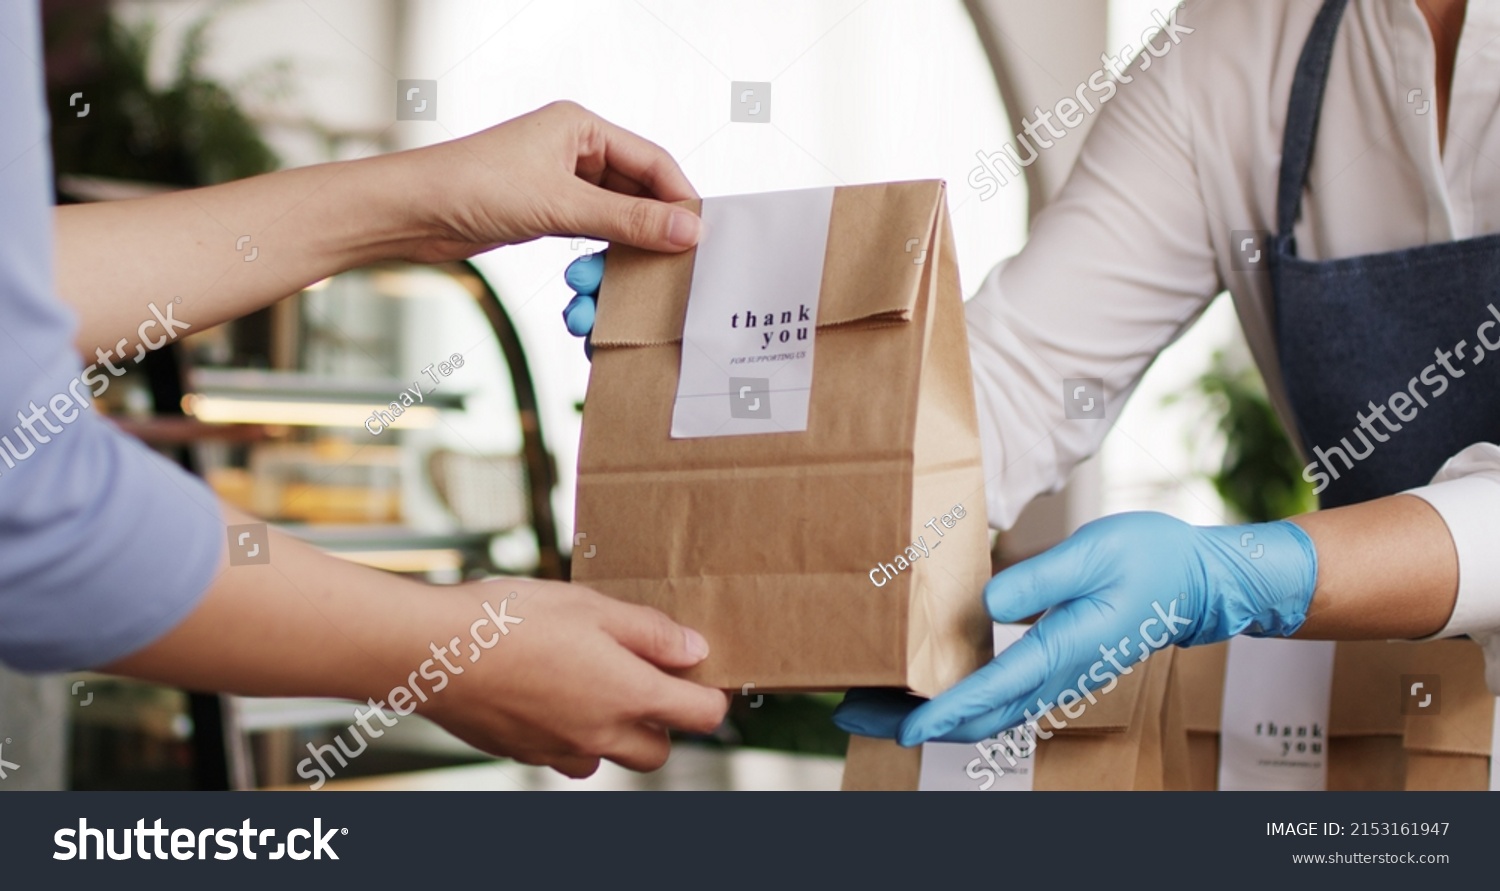 Asia people woman hand glove or face mask happy enjoy buy fast food carry send paper box pick up take home to-go lunch meal. Small cafe coffee shop work with wrap care new normal for SME omni channel. #2153161947